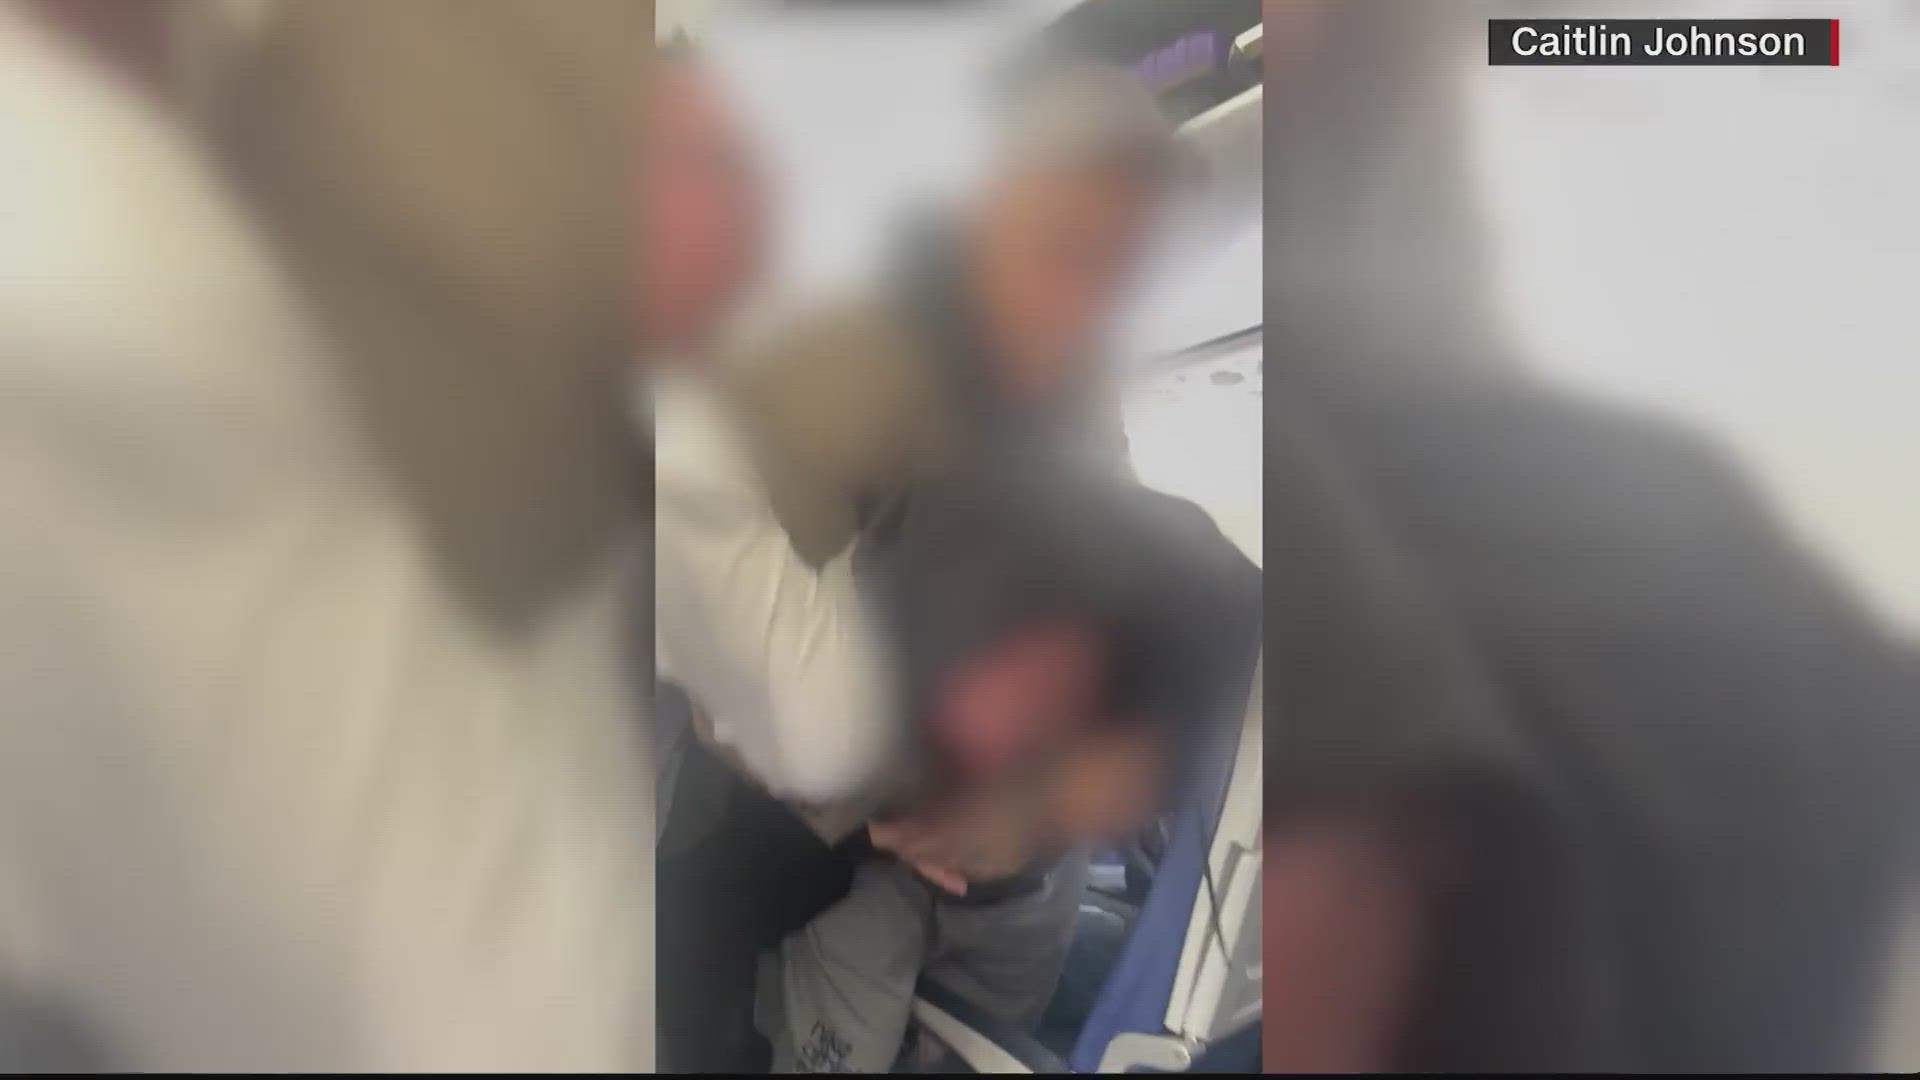 The latest incident happened Monday as passengers were boarding a Southwest flight from Dallas to Phoenix. Two passengers got into a fist fight.